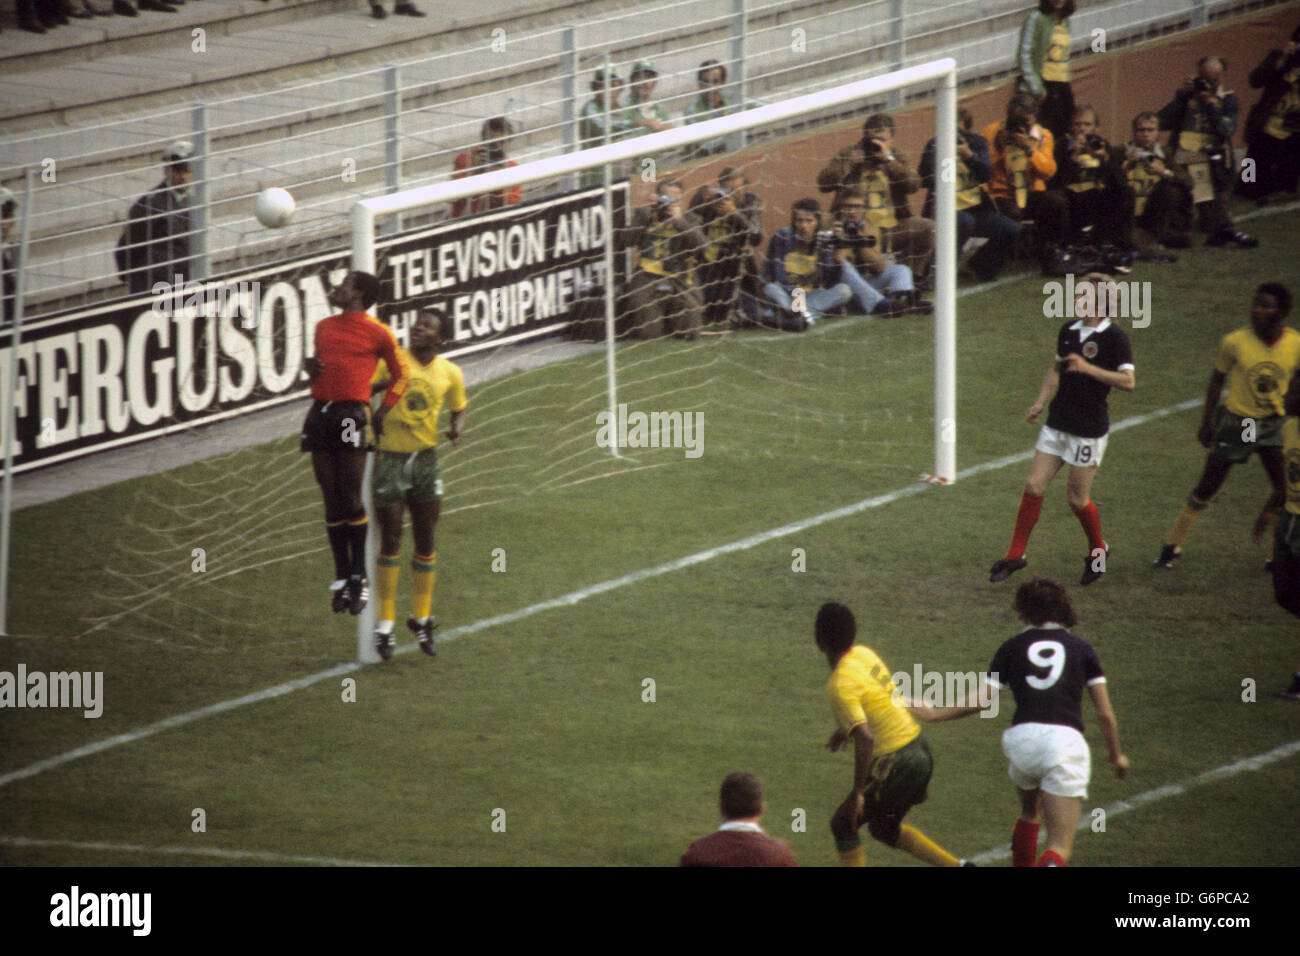 Soccer - FIFA World Cup West Germany 1974 - Group 2 - Zaire v Scotland - Westfalenstadion, Dortmund. Zaire goalkeeper Kazadi Muamba (l) watches as the ball goes over the crossbar. Pictured for Scotland (r) is Denis Law. Stock Photo